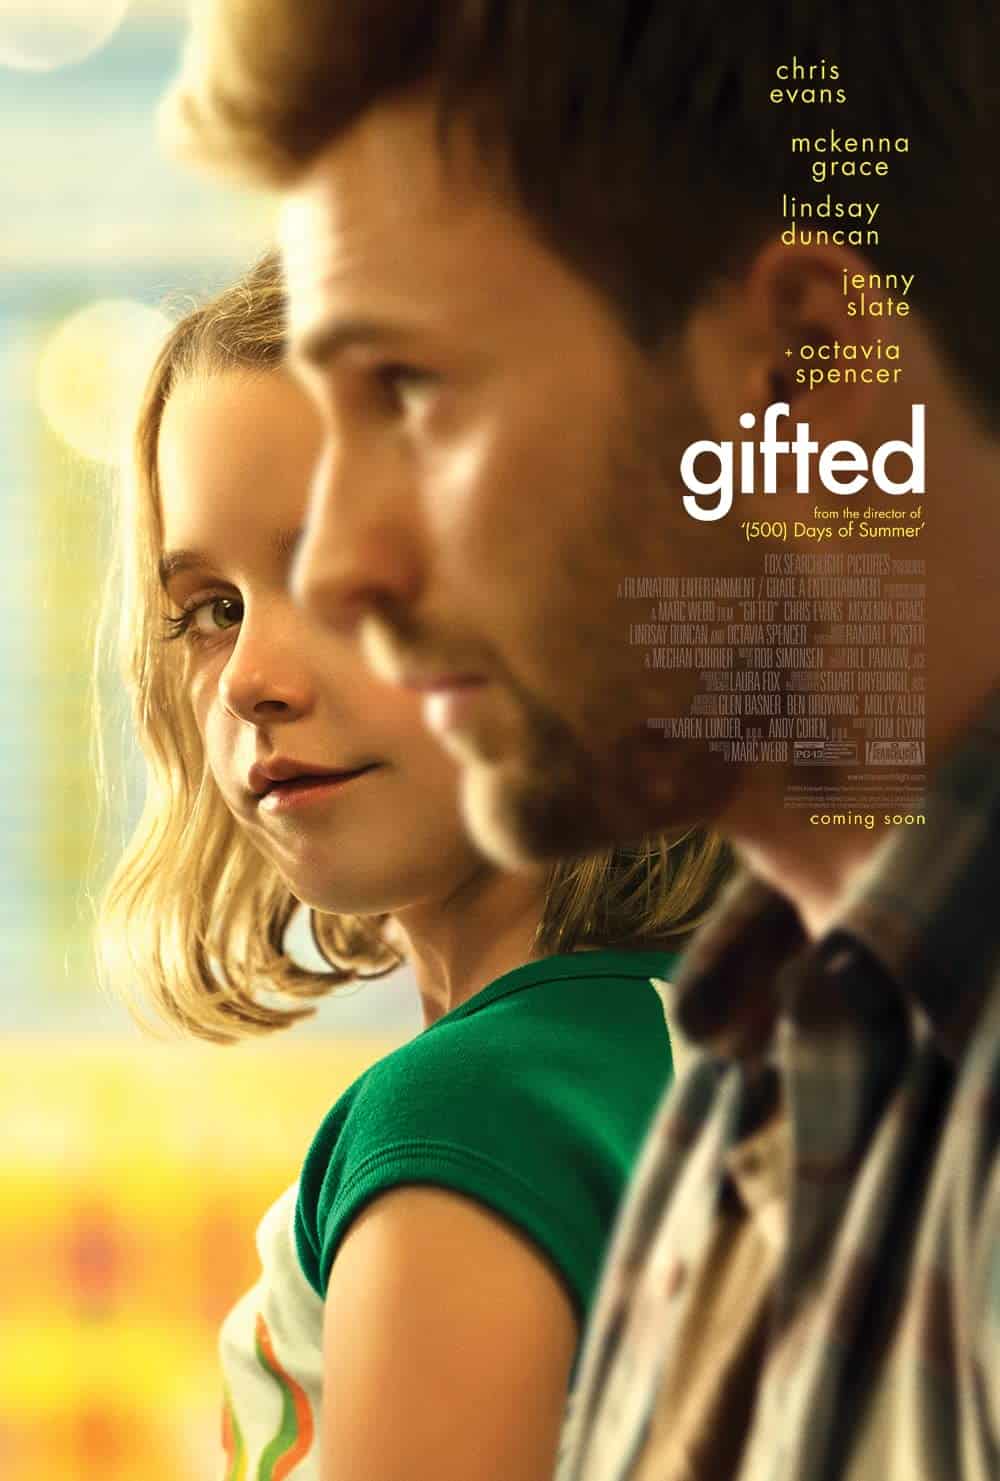 Gifted (2017) Best Math Movies to Add in Your Watchlist